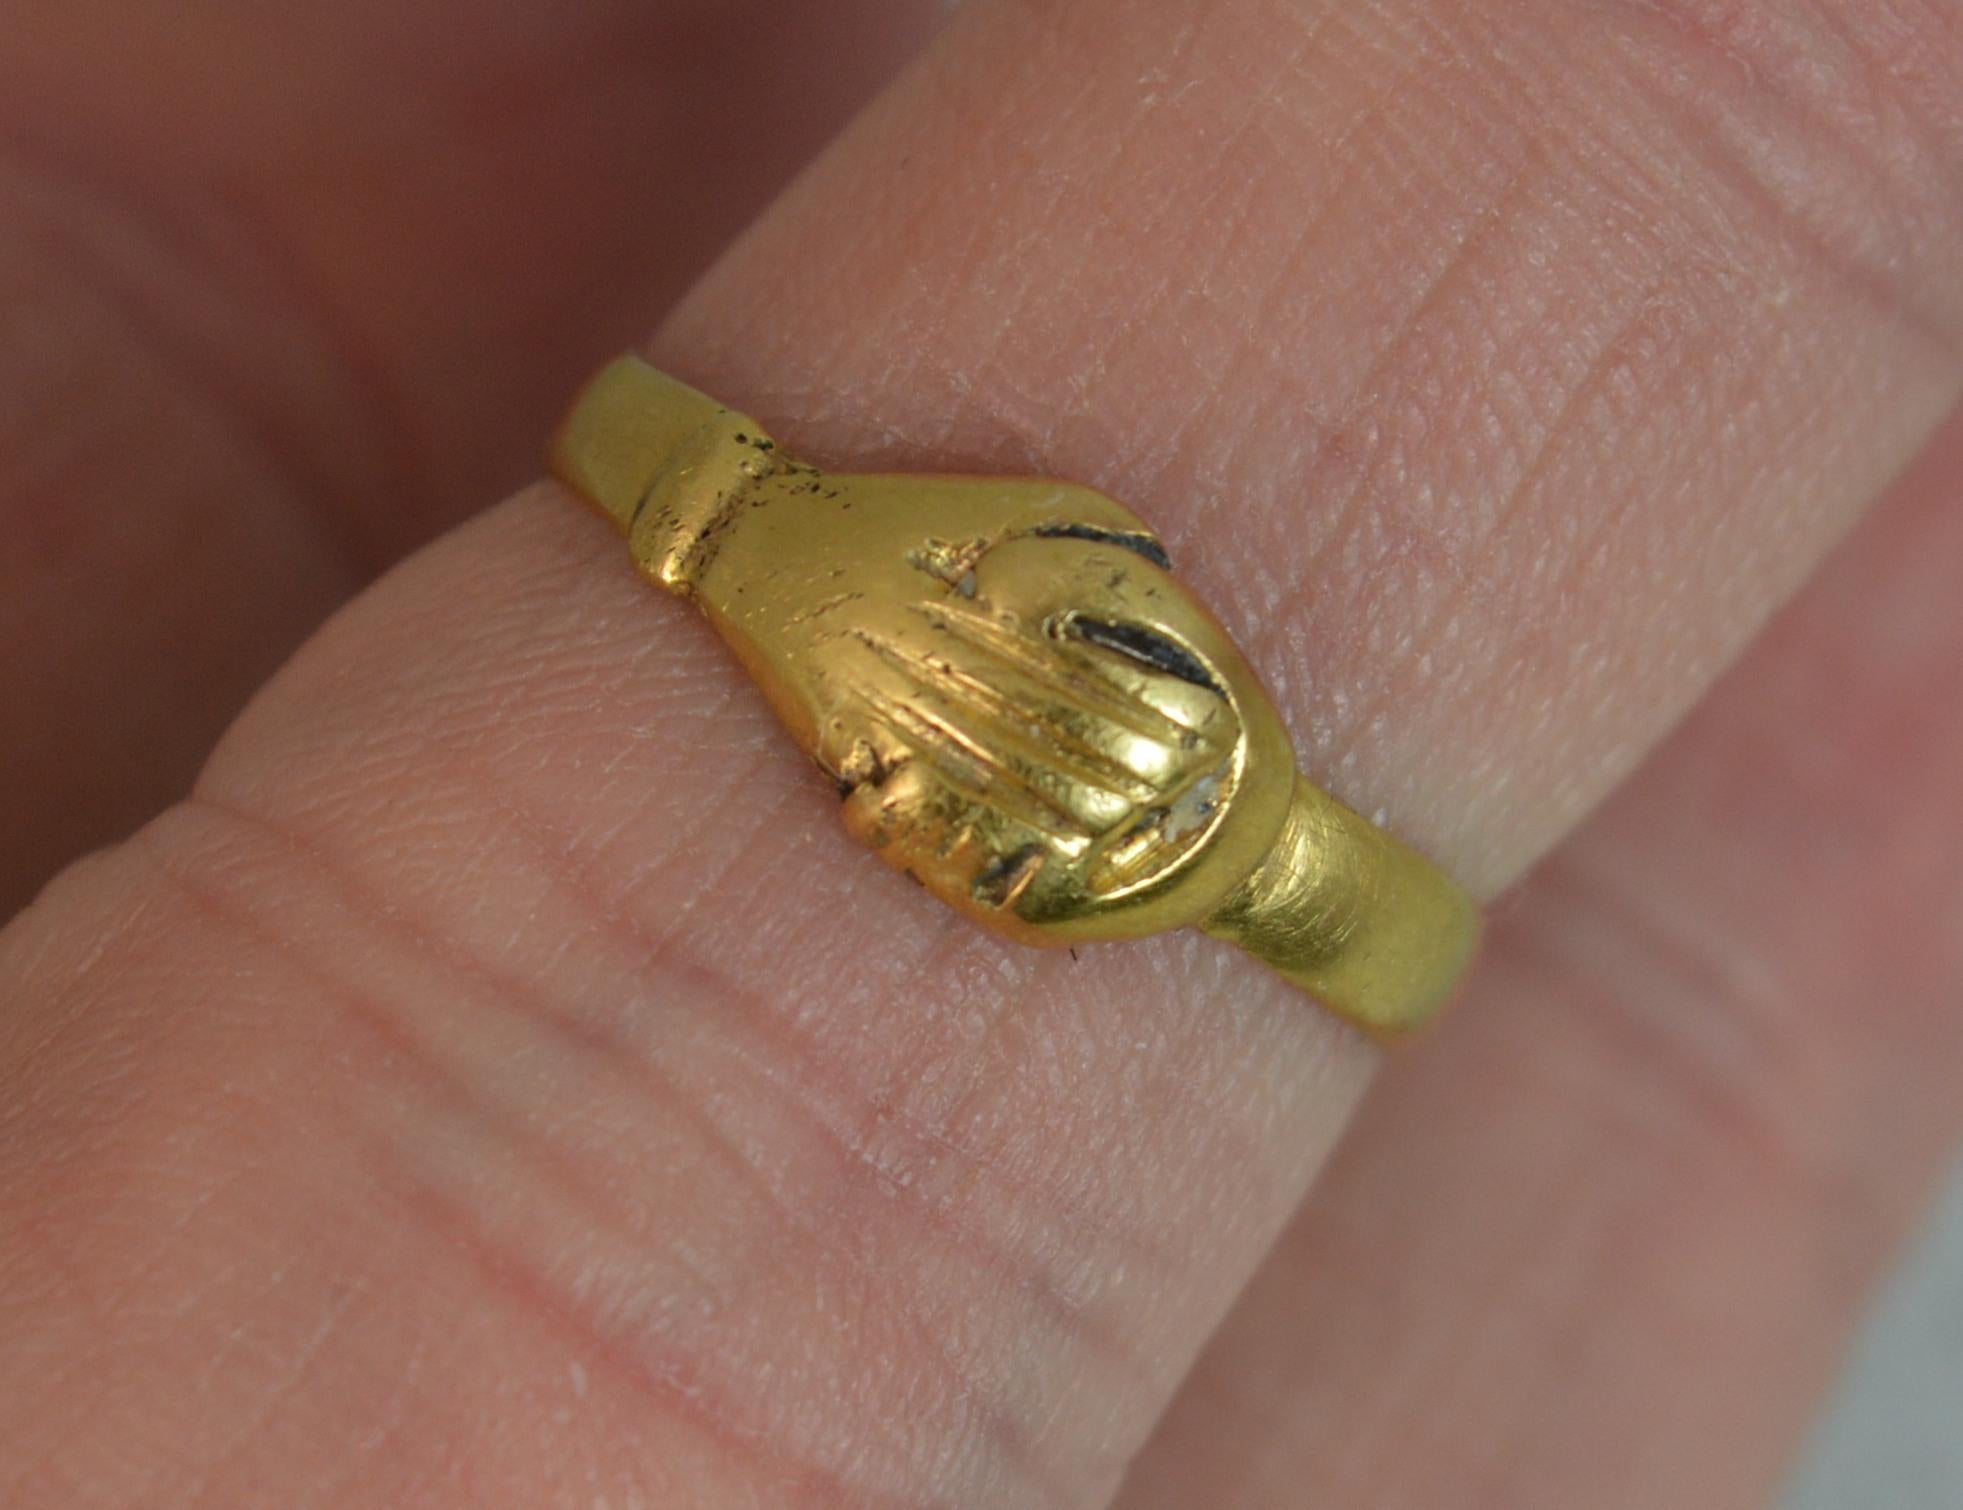 A superb true mid Georgian era Fede band ring, c1760.
SIZE ; K UK, 5 1/4 US
18 carat yellow gold example.
Designed as a simple plain band with a fede two hands holding to front.
A fede ring is a design of ring in which two hands meet and are clasped